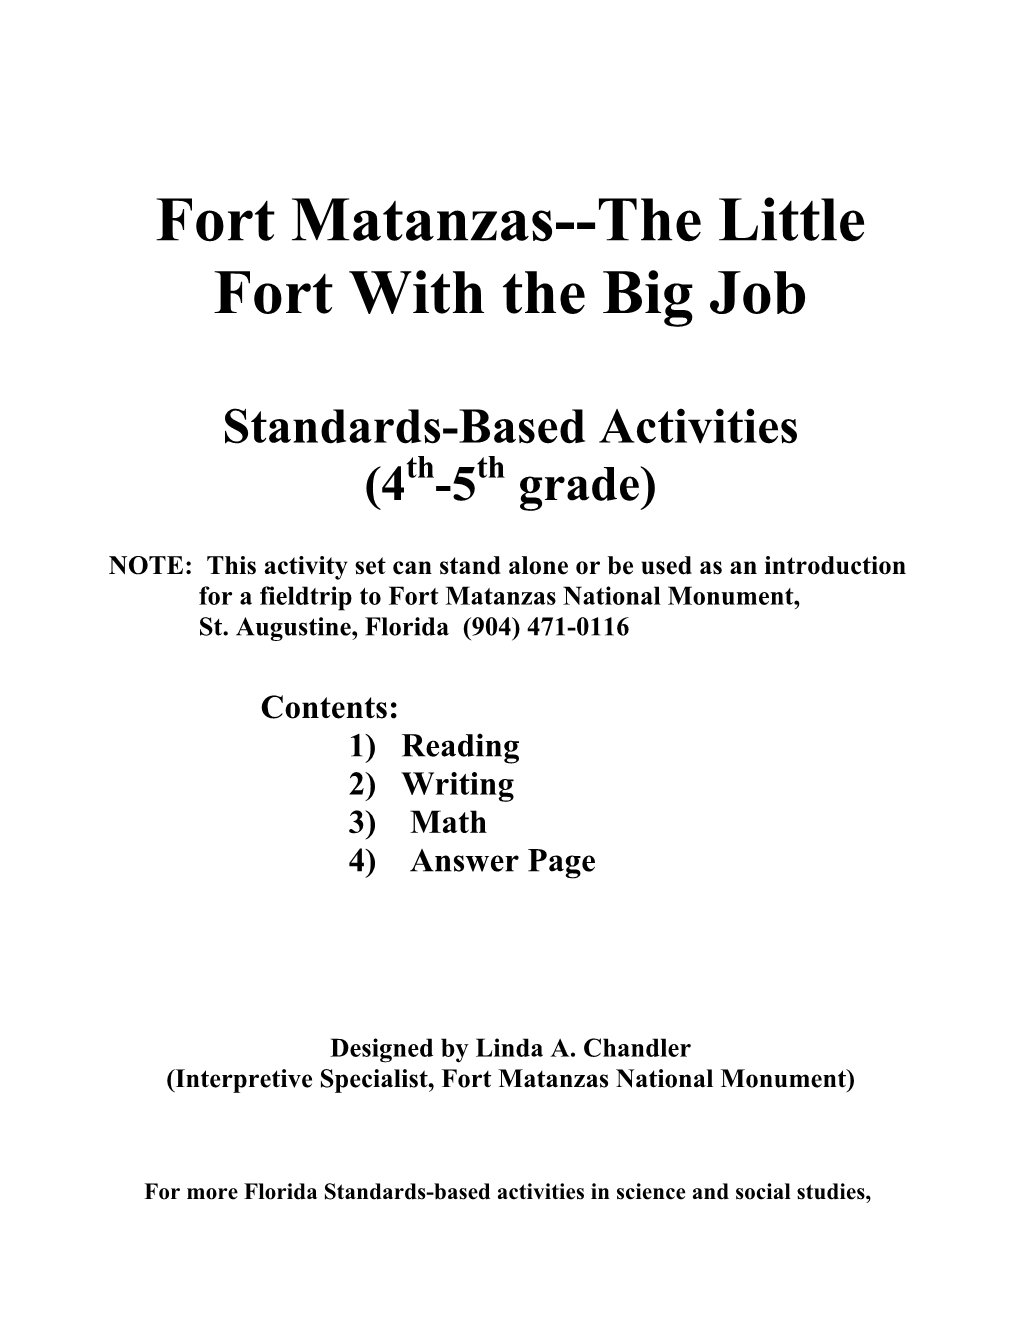 Fort Matanzas--The Little Fort with the Big Job